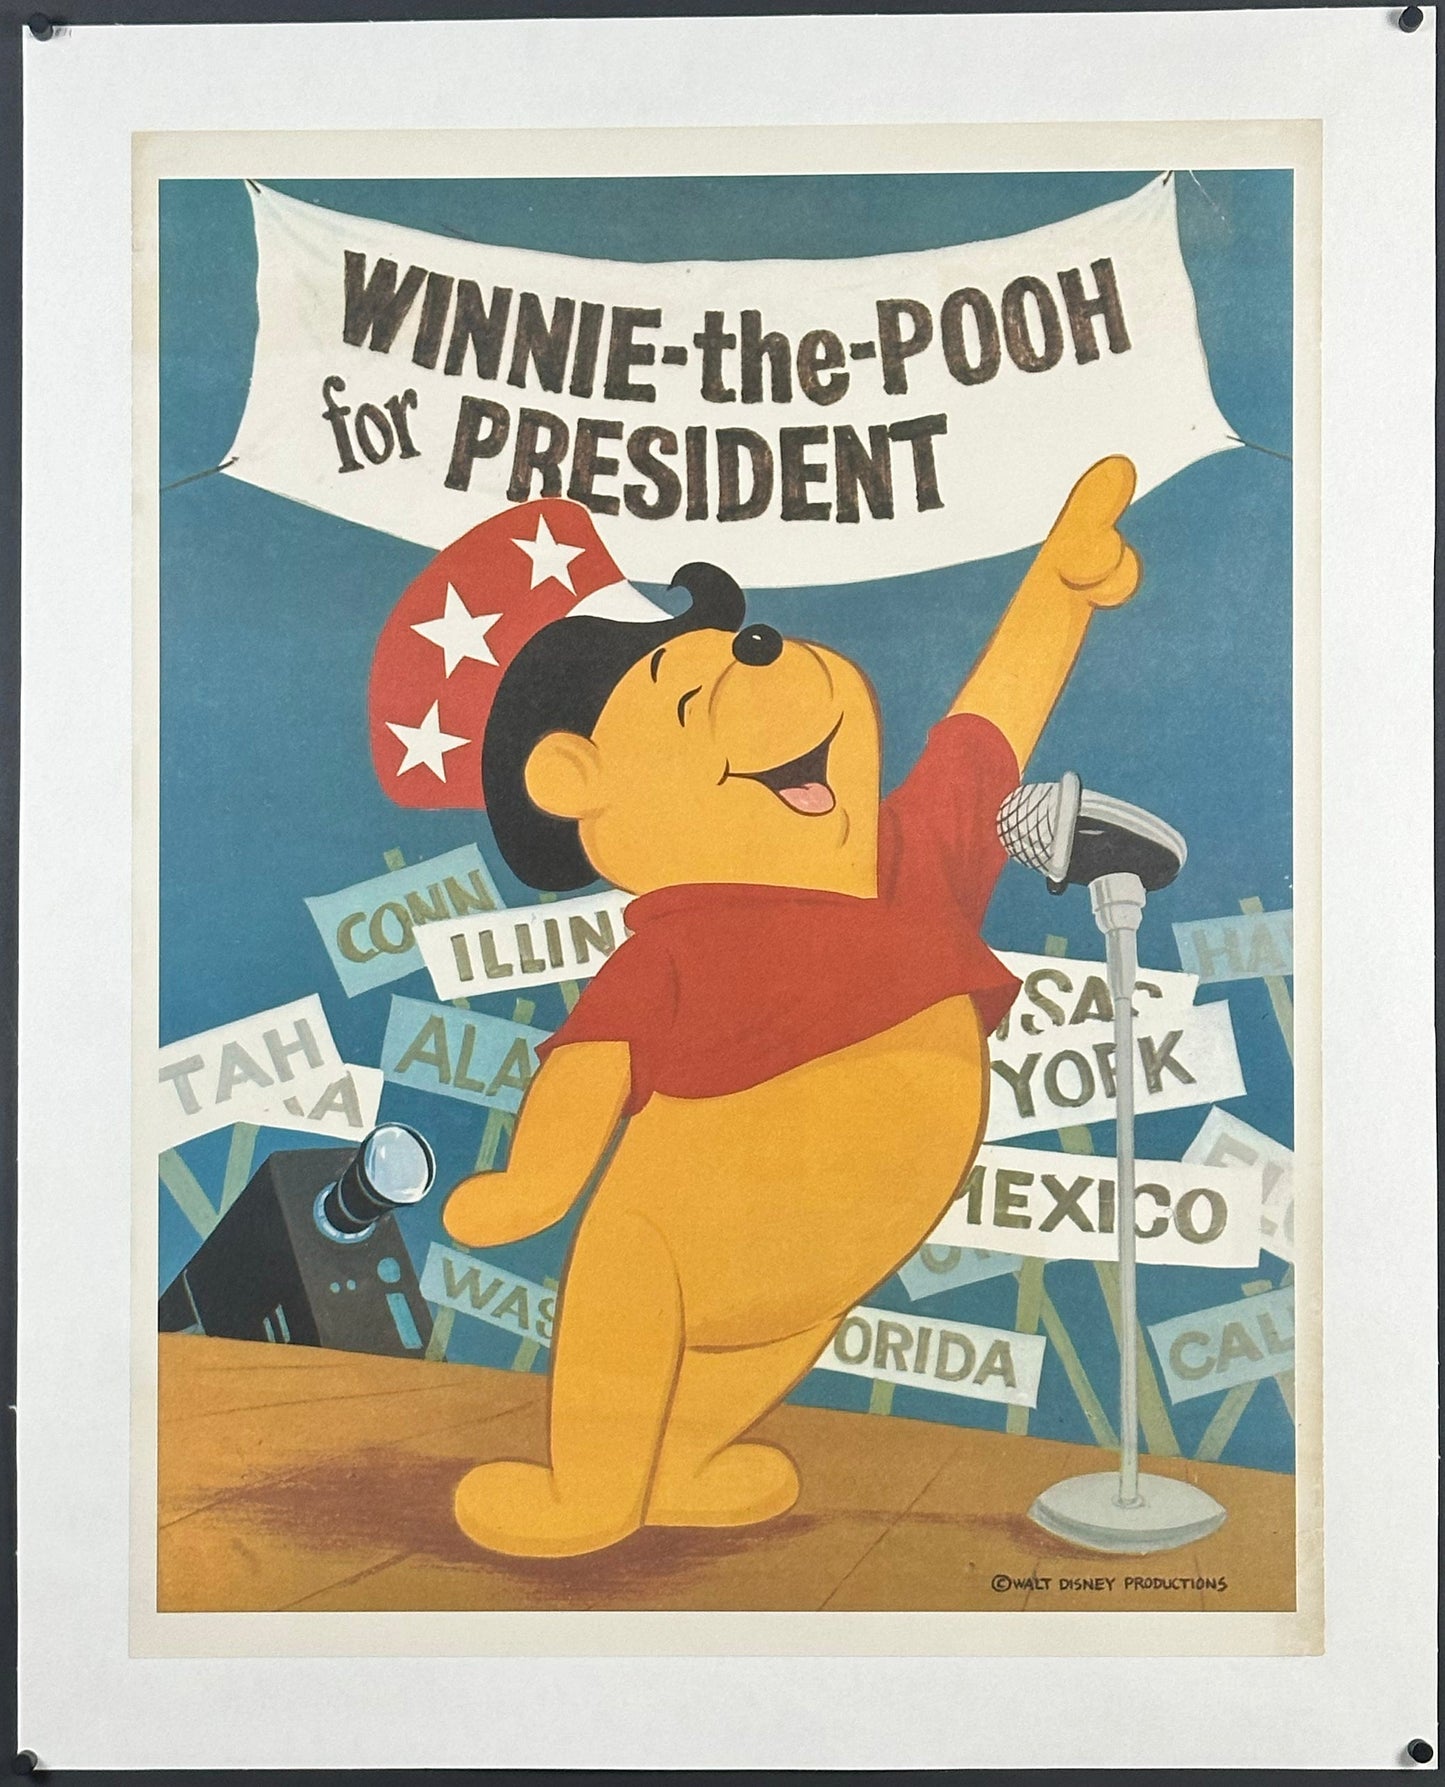 "Winnie-the-Pooh for President" "Election Campaign" Poster (1976) - posterpalace.com